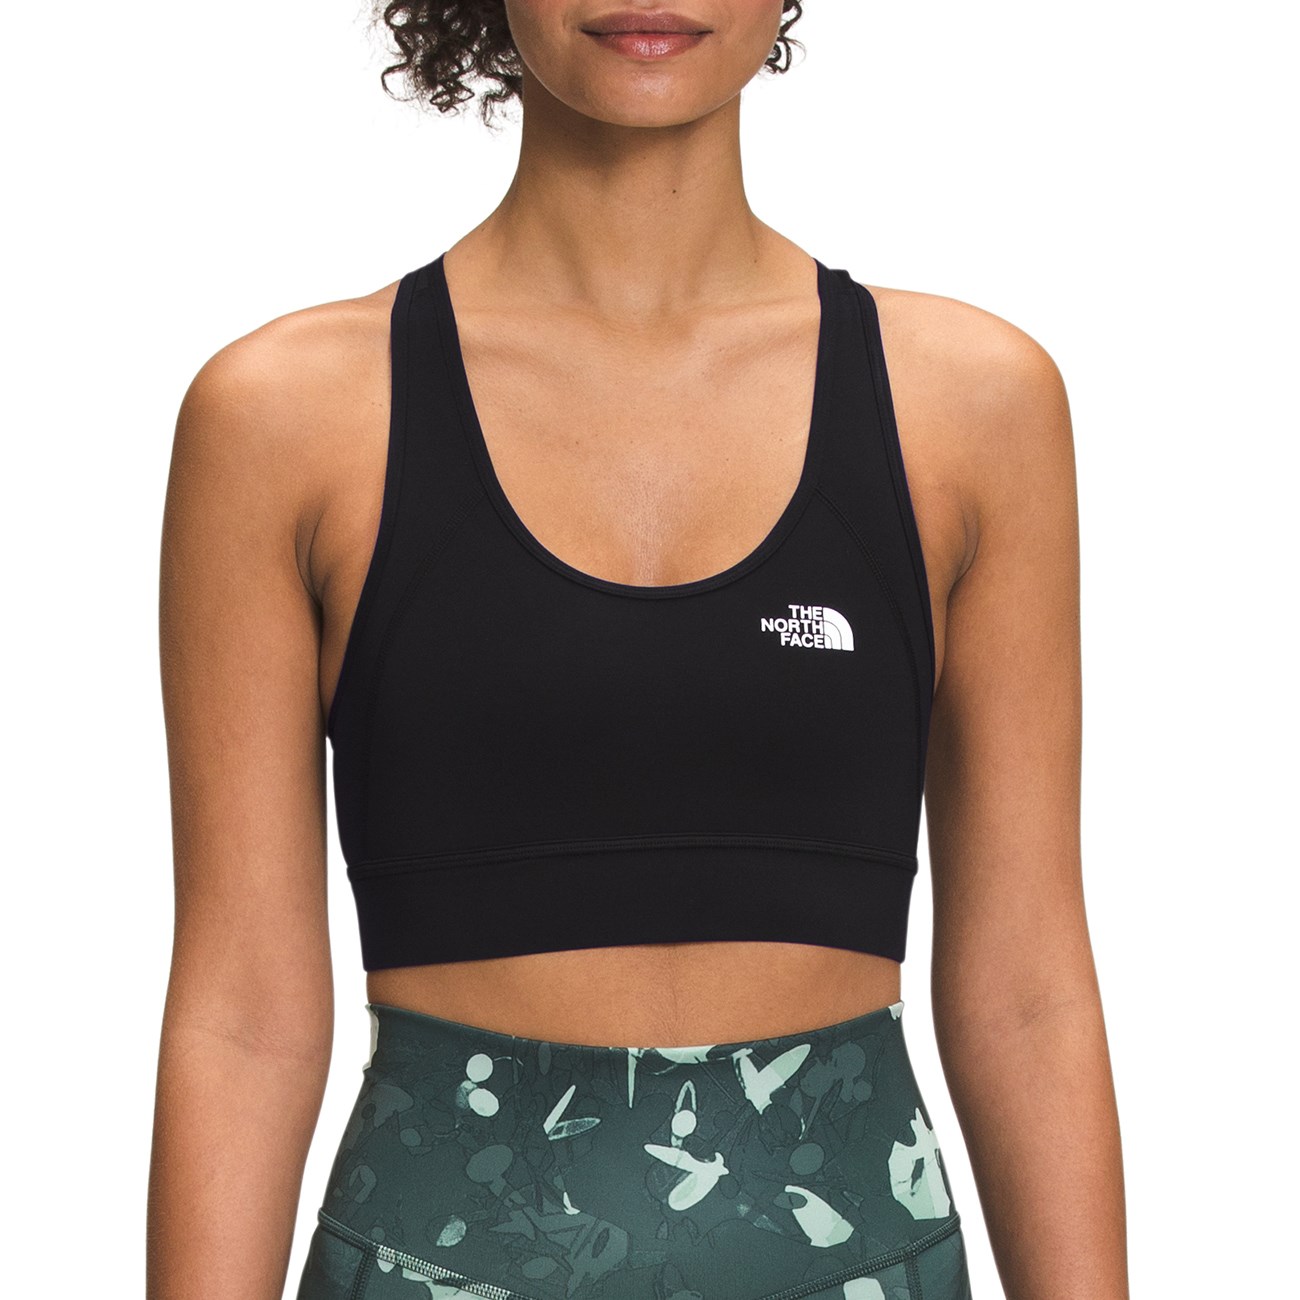 The North Face Bounce-B-Gone Bra - Sports bra Women's, Product Review